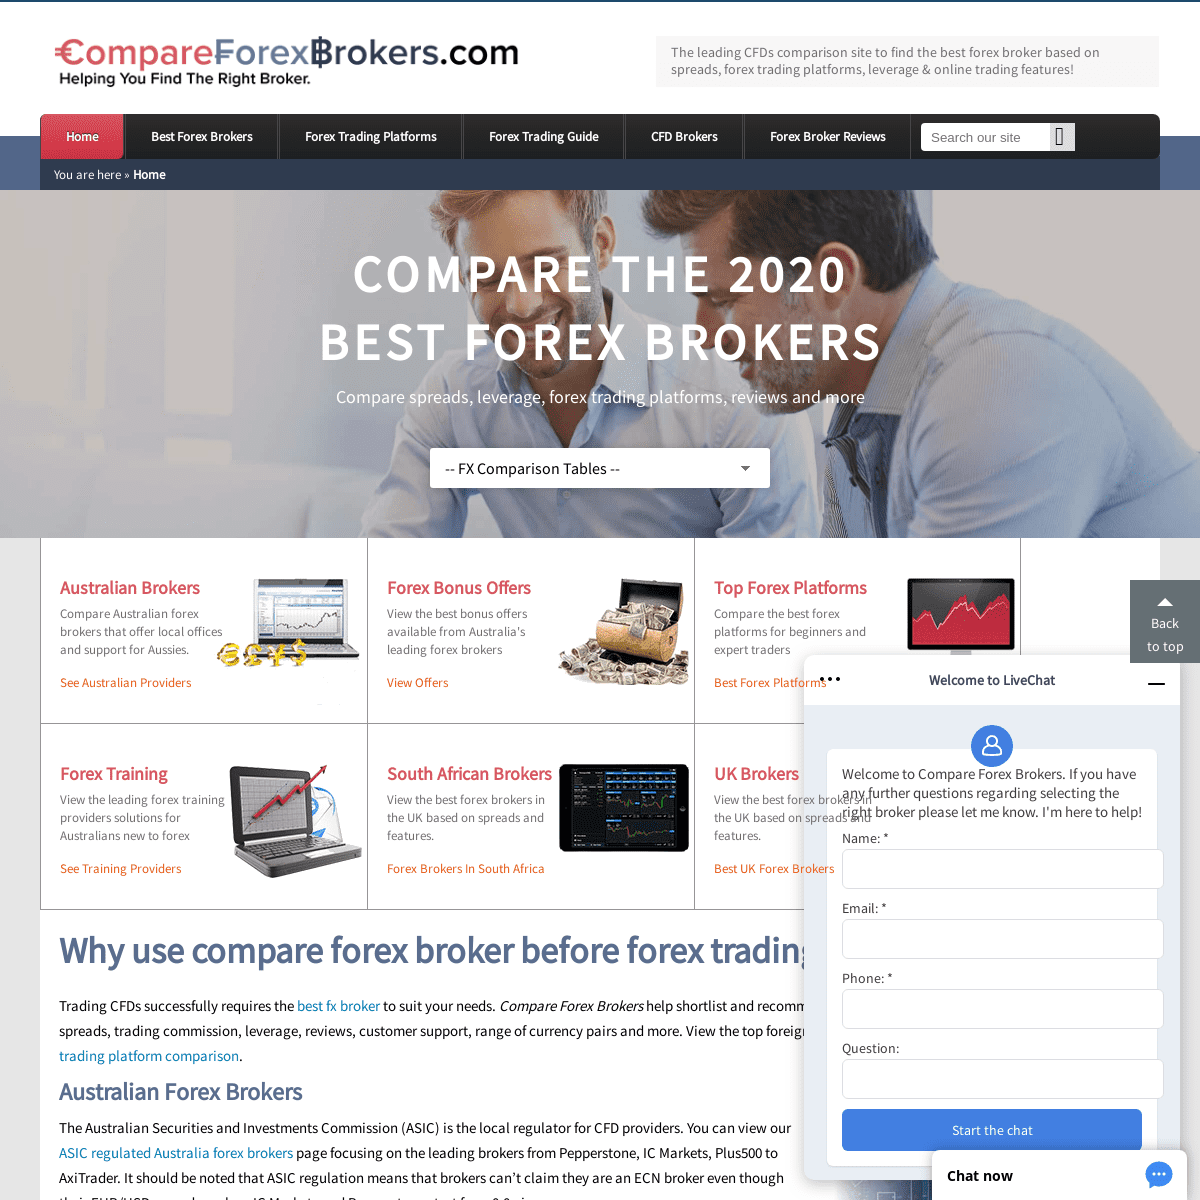 A complete backup of compareforexbrokers.com.au